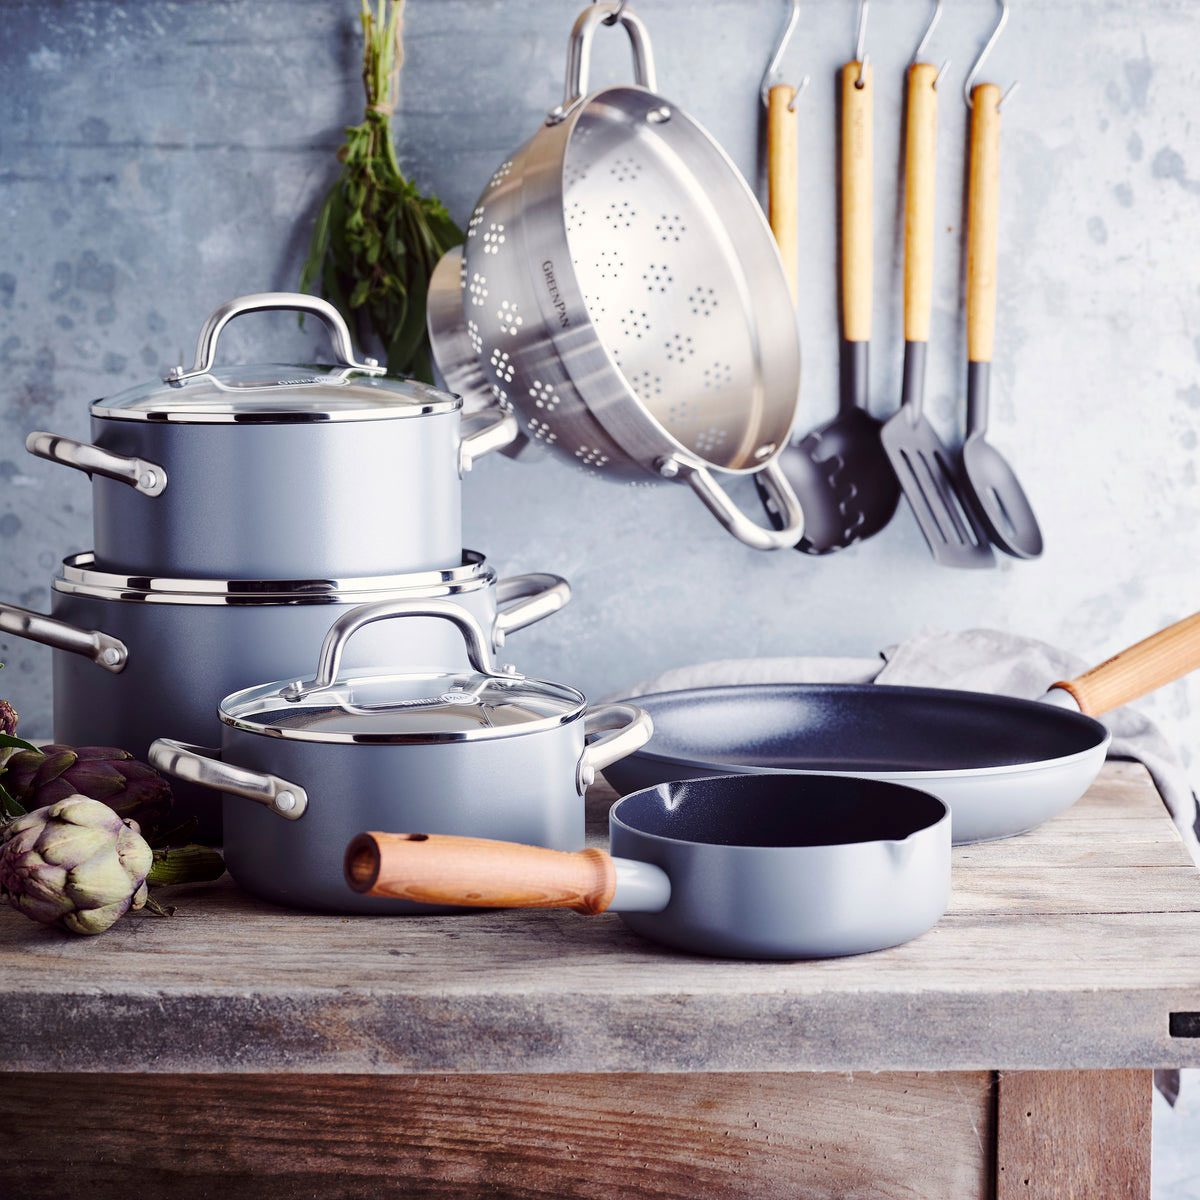 Snag Drew Barrymore's stunning 20-piece cookware set on sale at